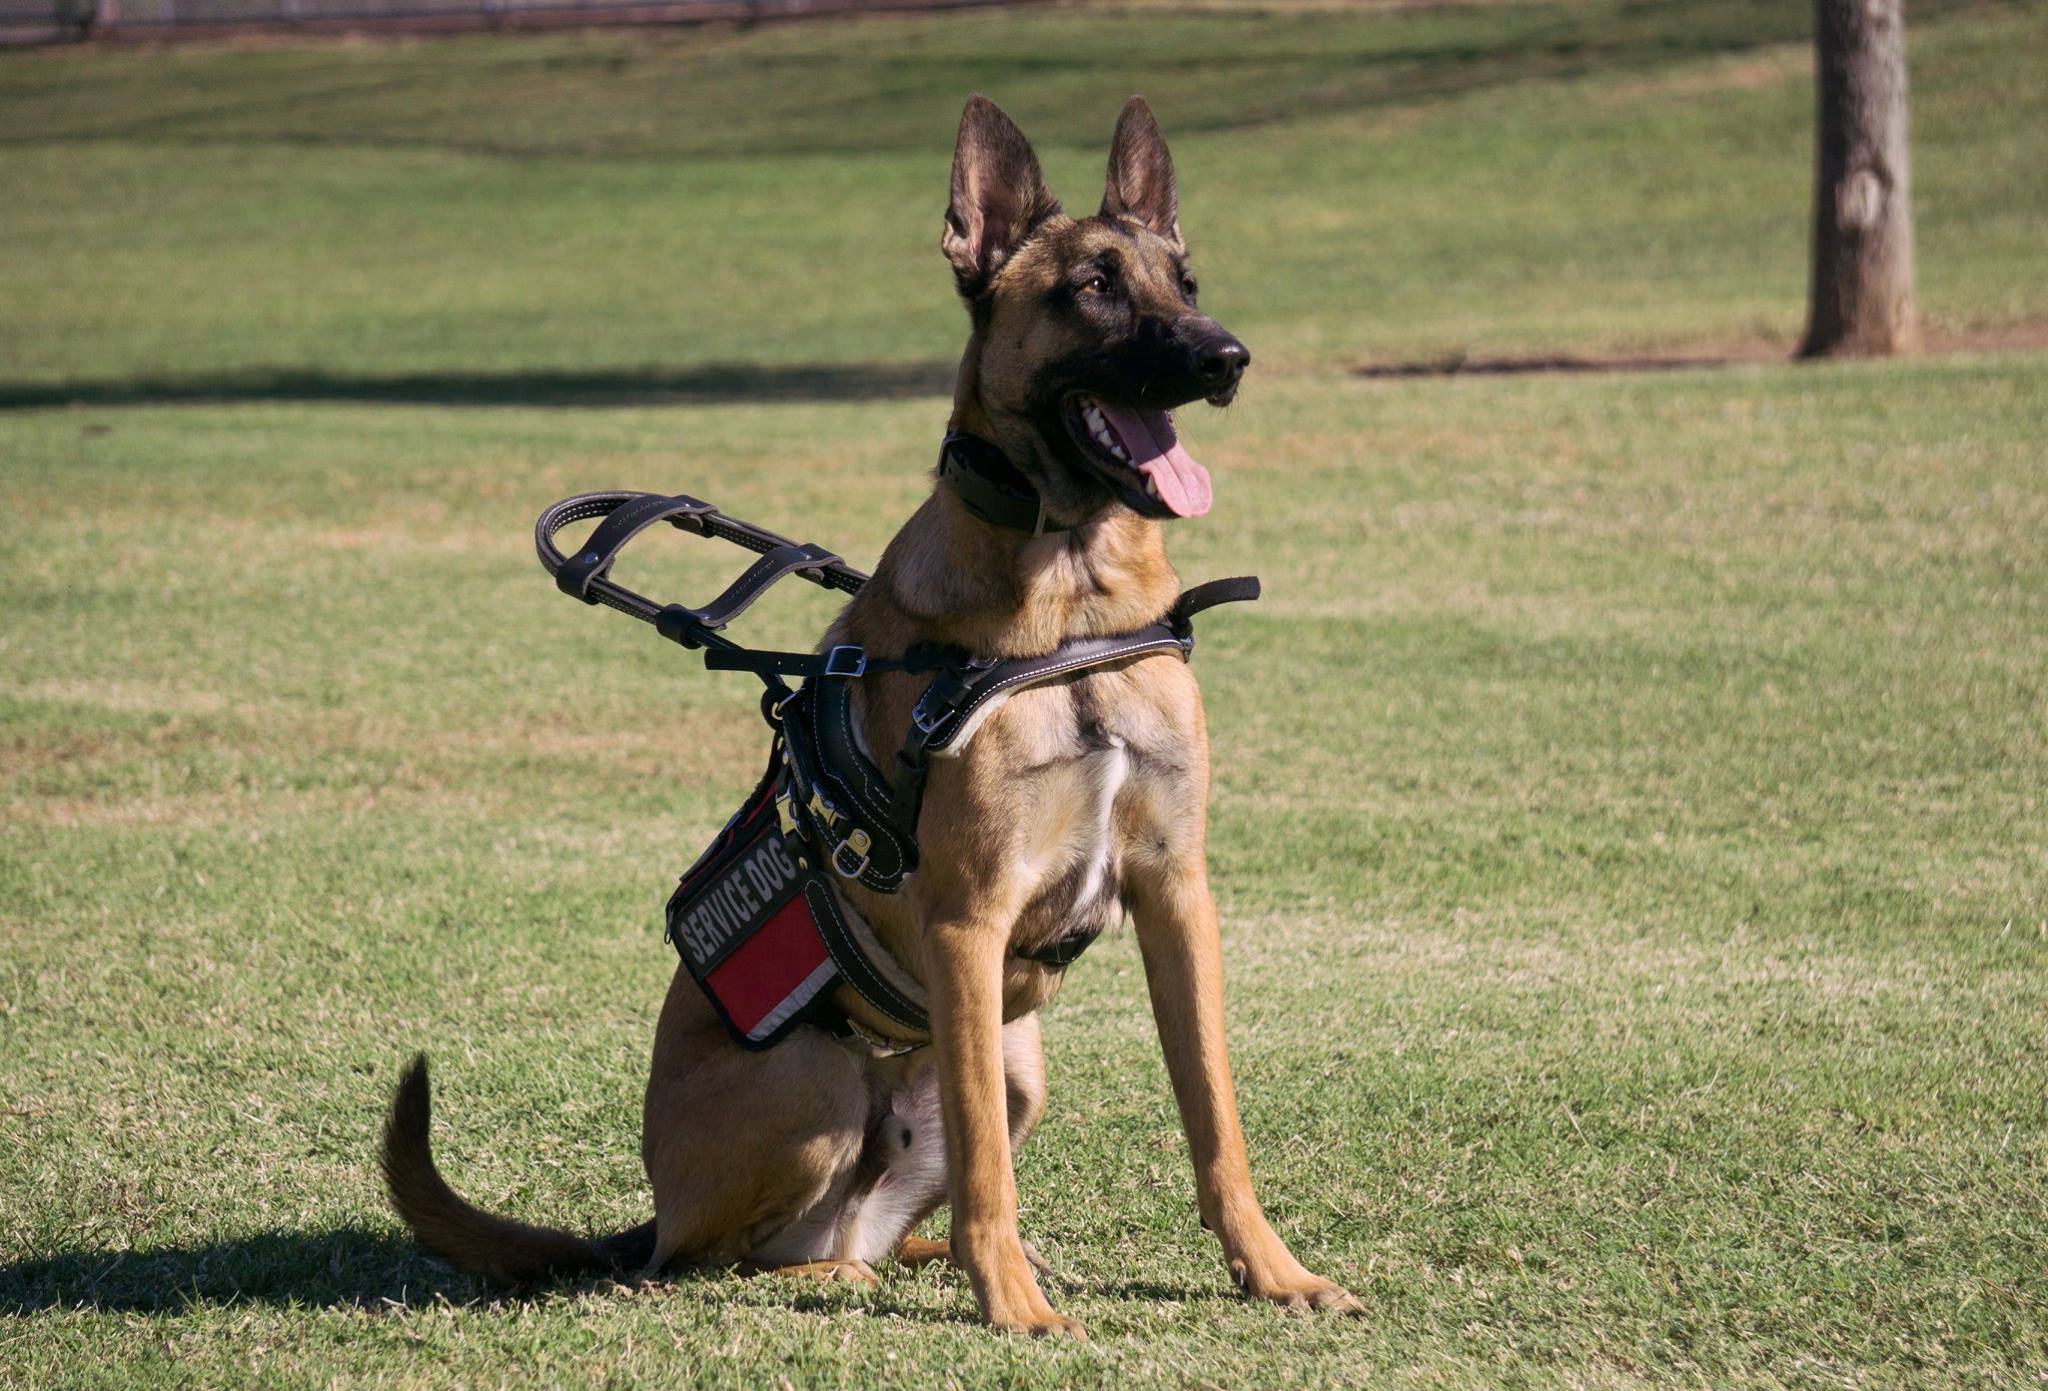 Spending Your Summer with a Service Dog in St. George